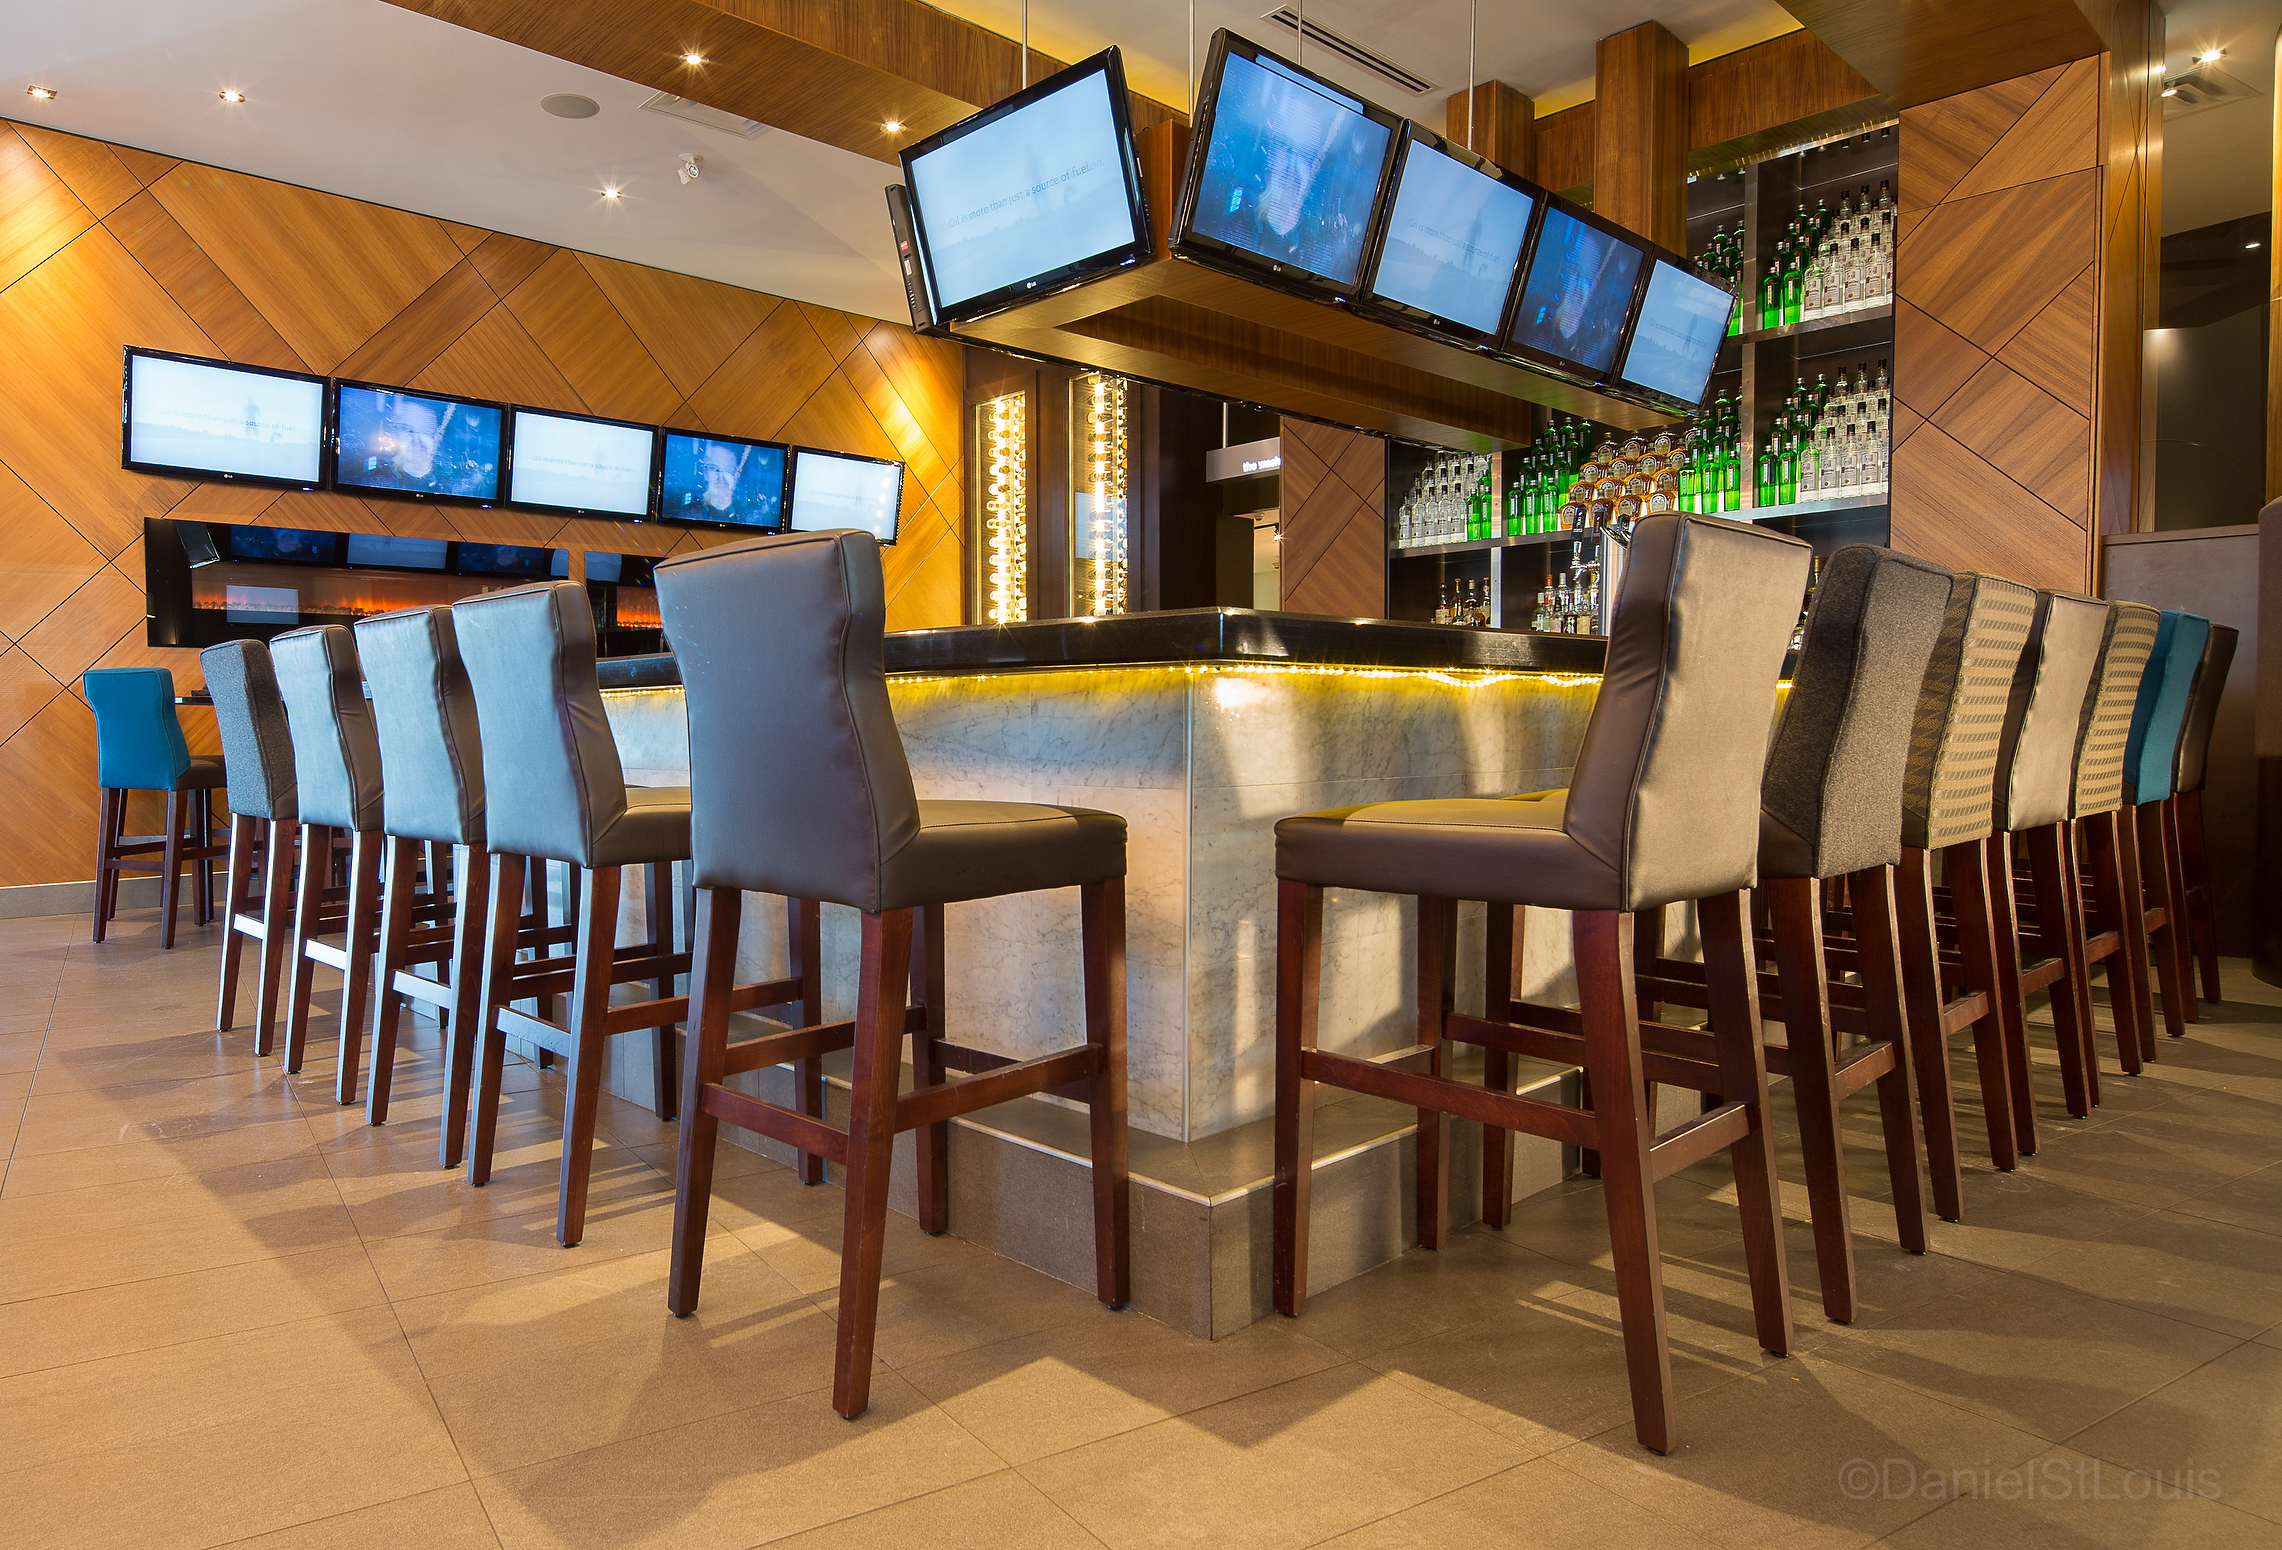 Moxies’ Bar and Grill, Moncton NB – Daniel St Louis – Commercial Photographer